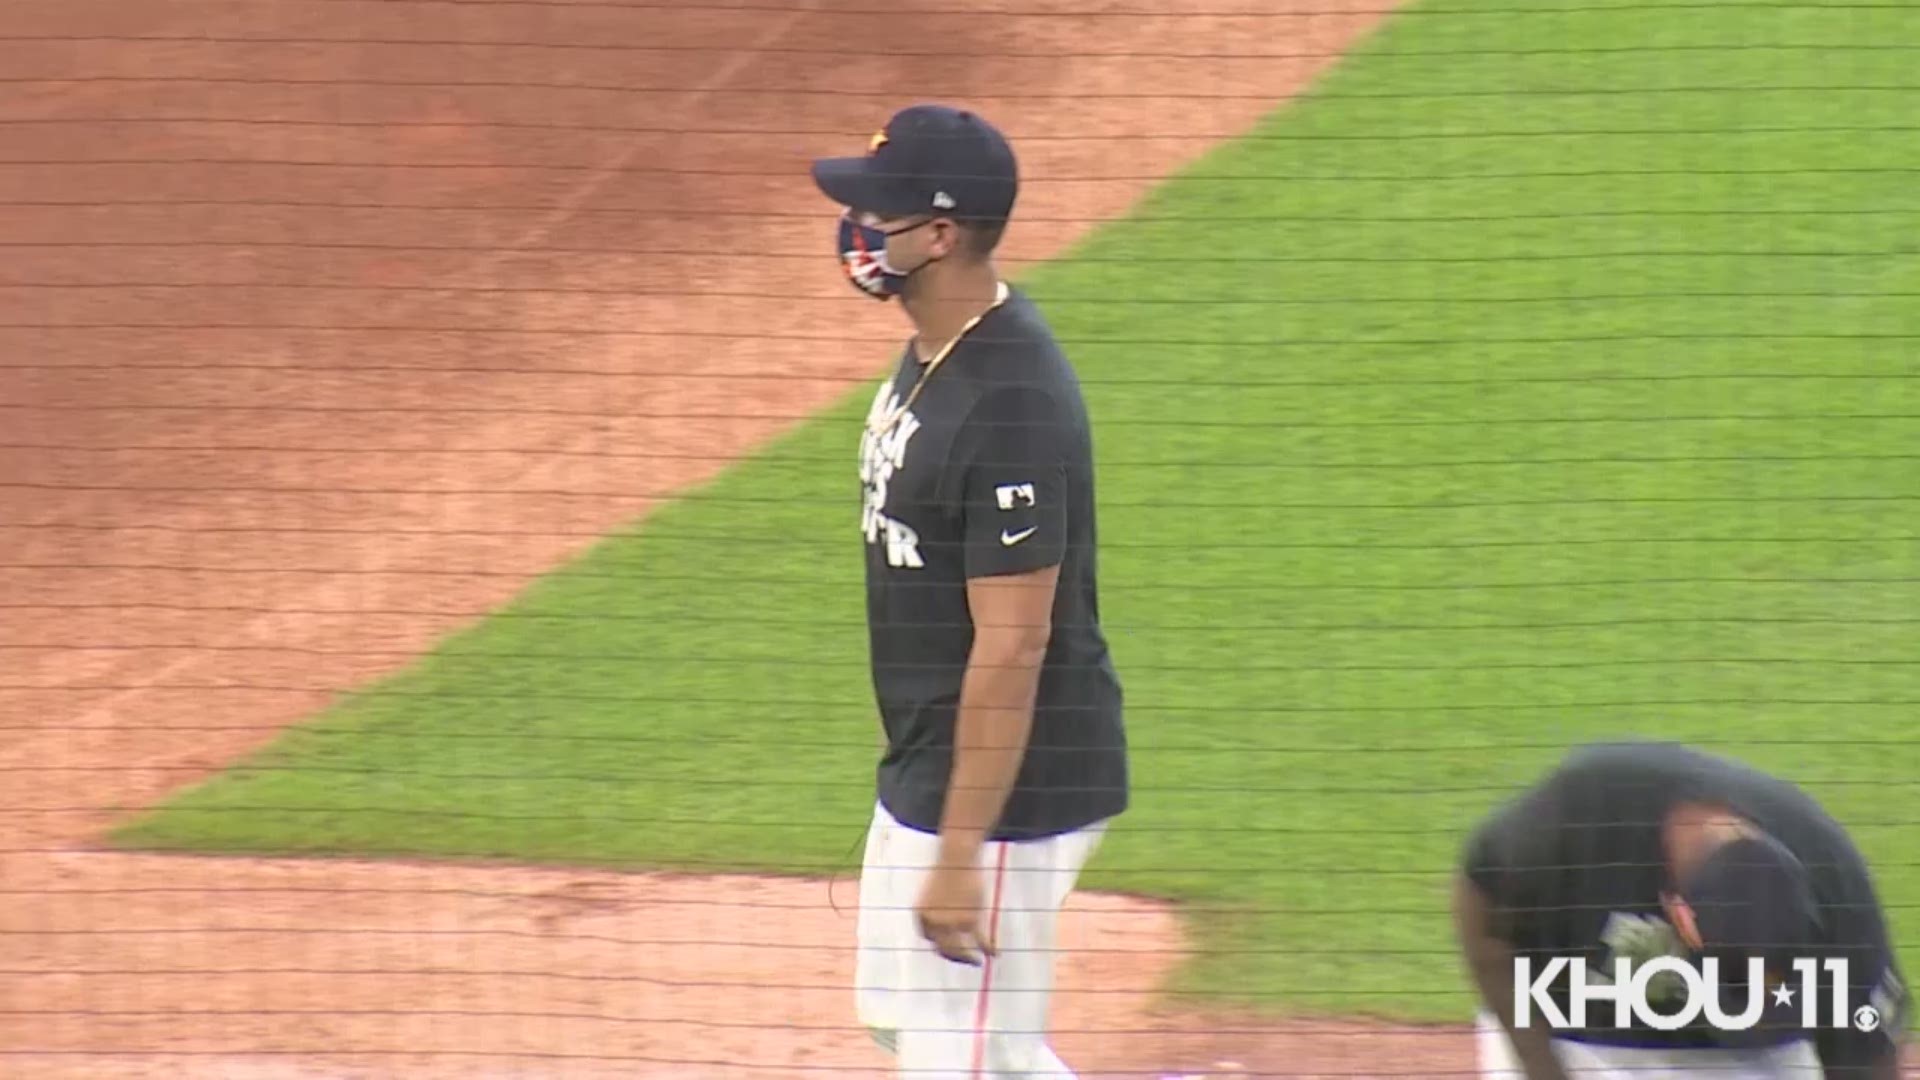 Hours away from the start of their 2020 season, the Houston Astros took the field of Minute Maid Park sporting Black Lives Matter T-shirts.